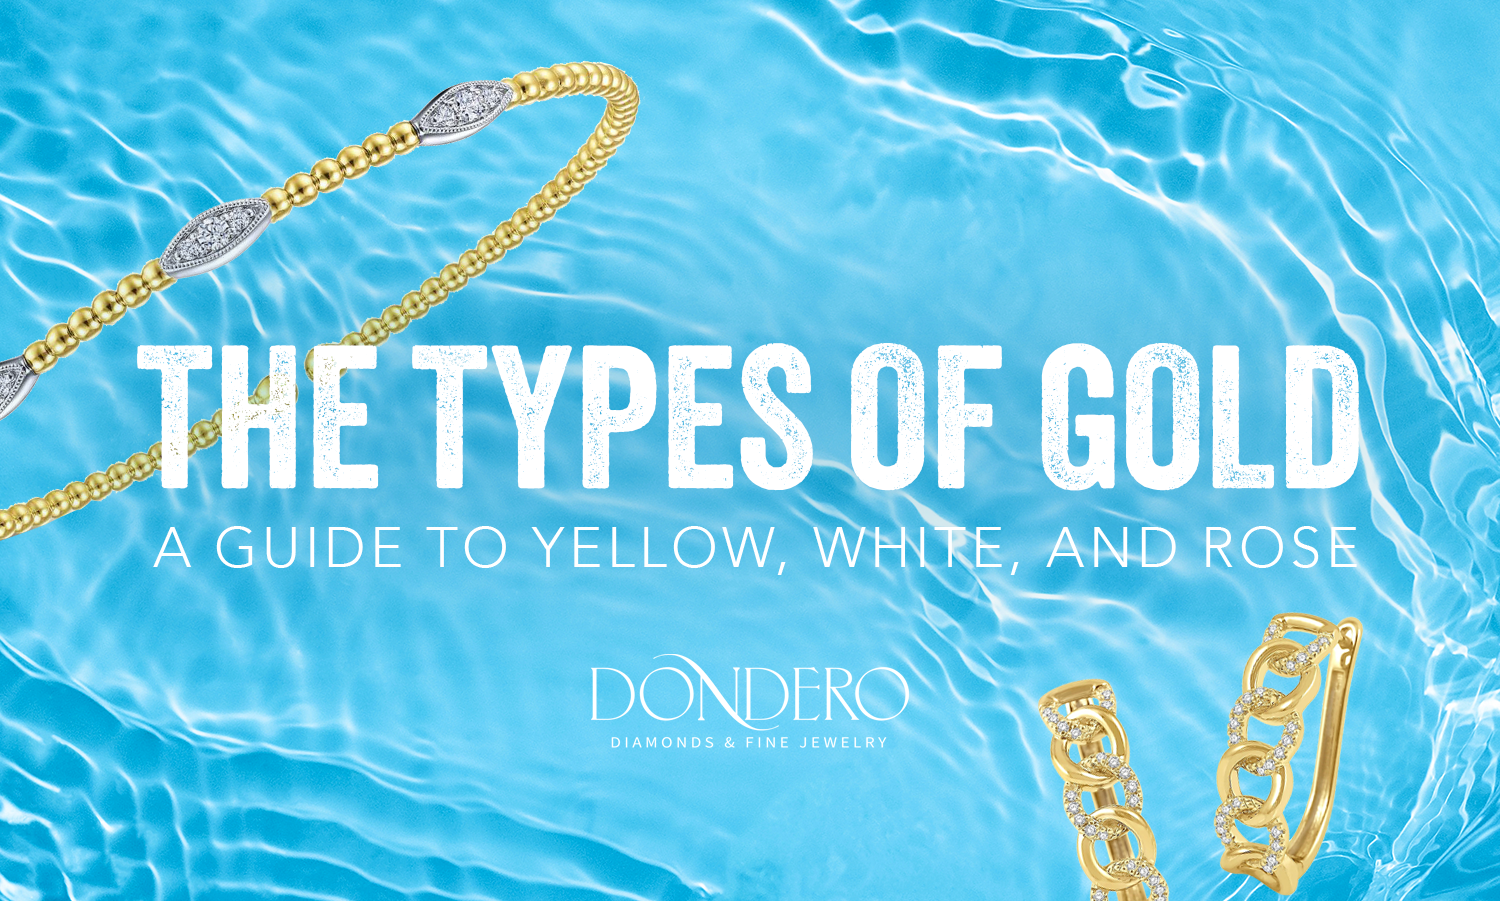 Chain in yellow gold - Jewelry - Categories